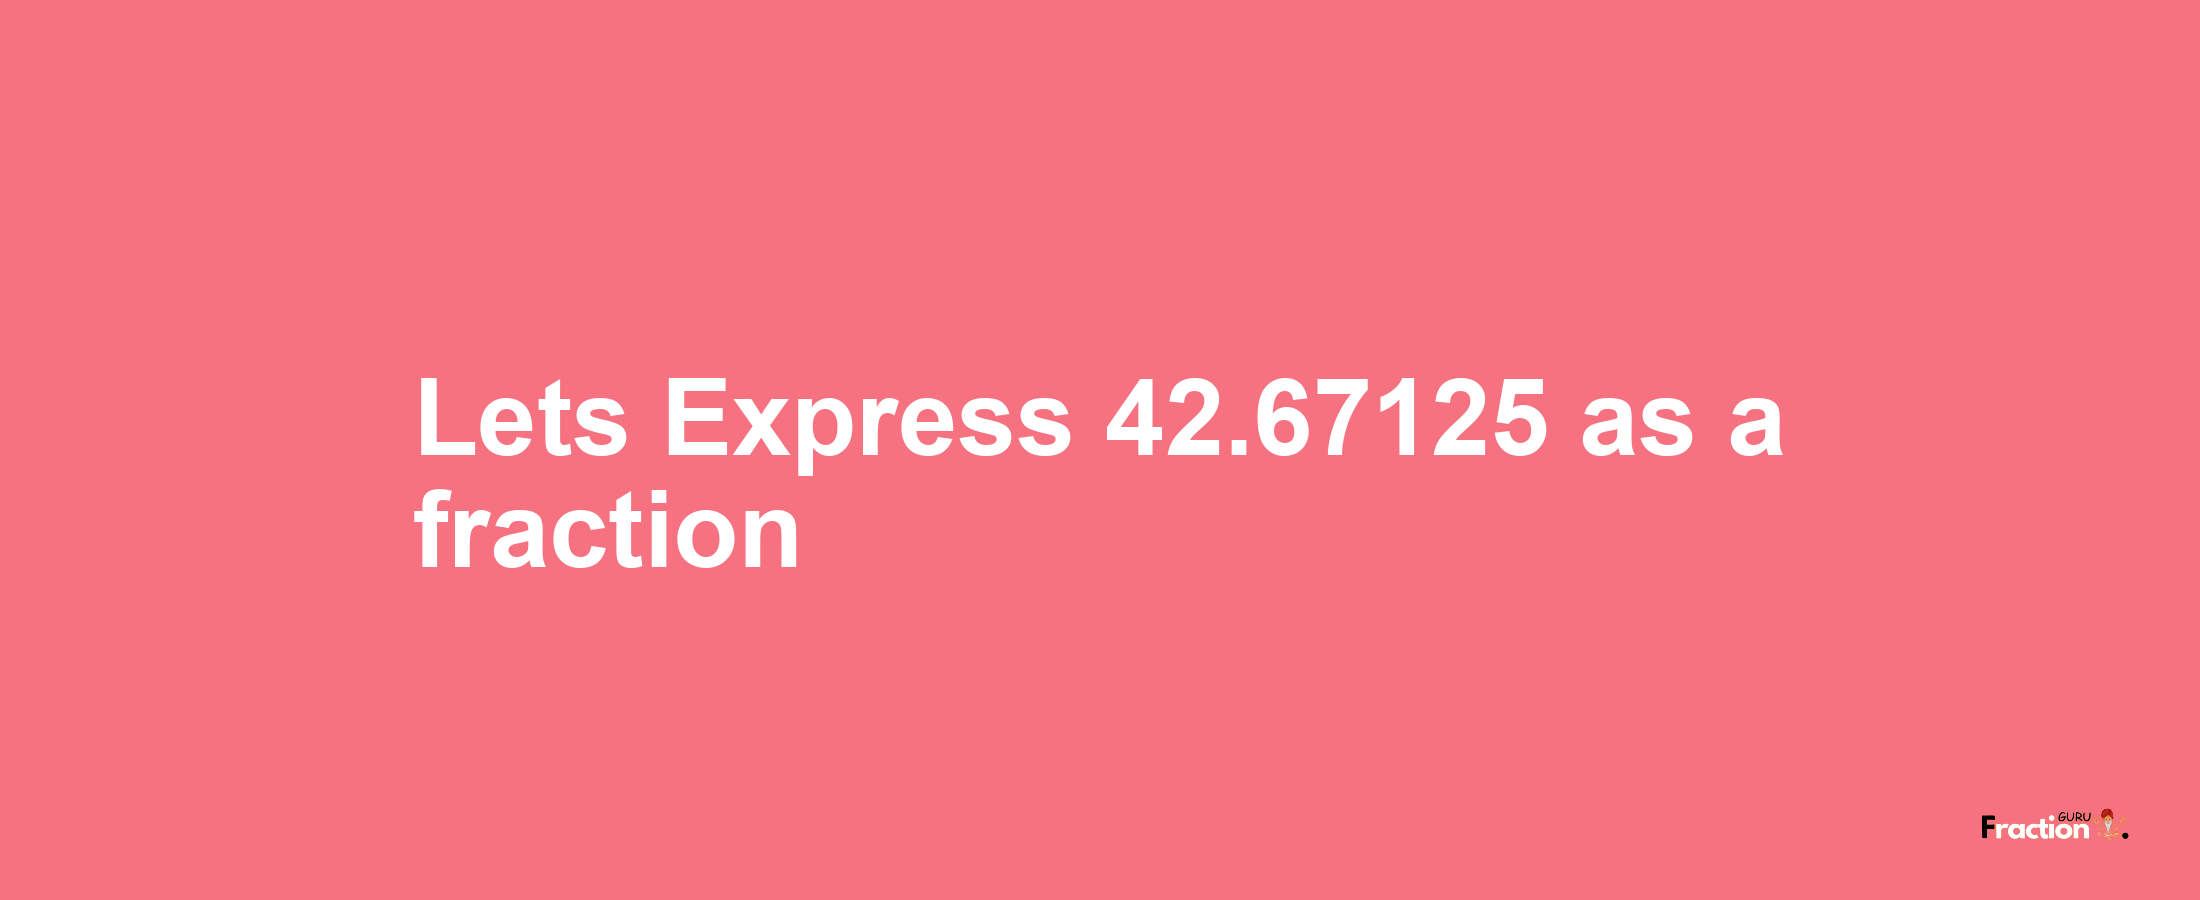 Lets Express 42.67125 as afraction